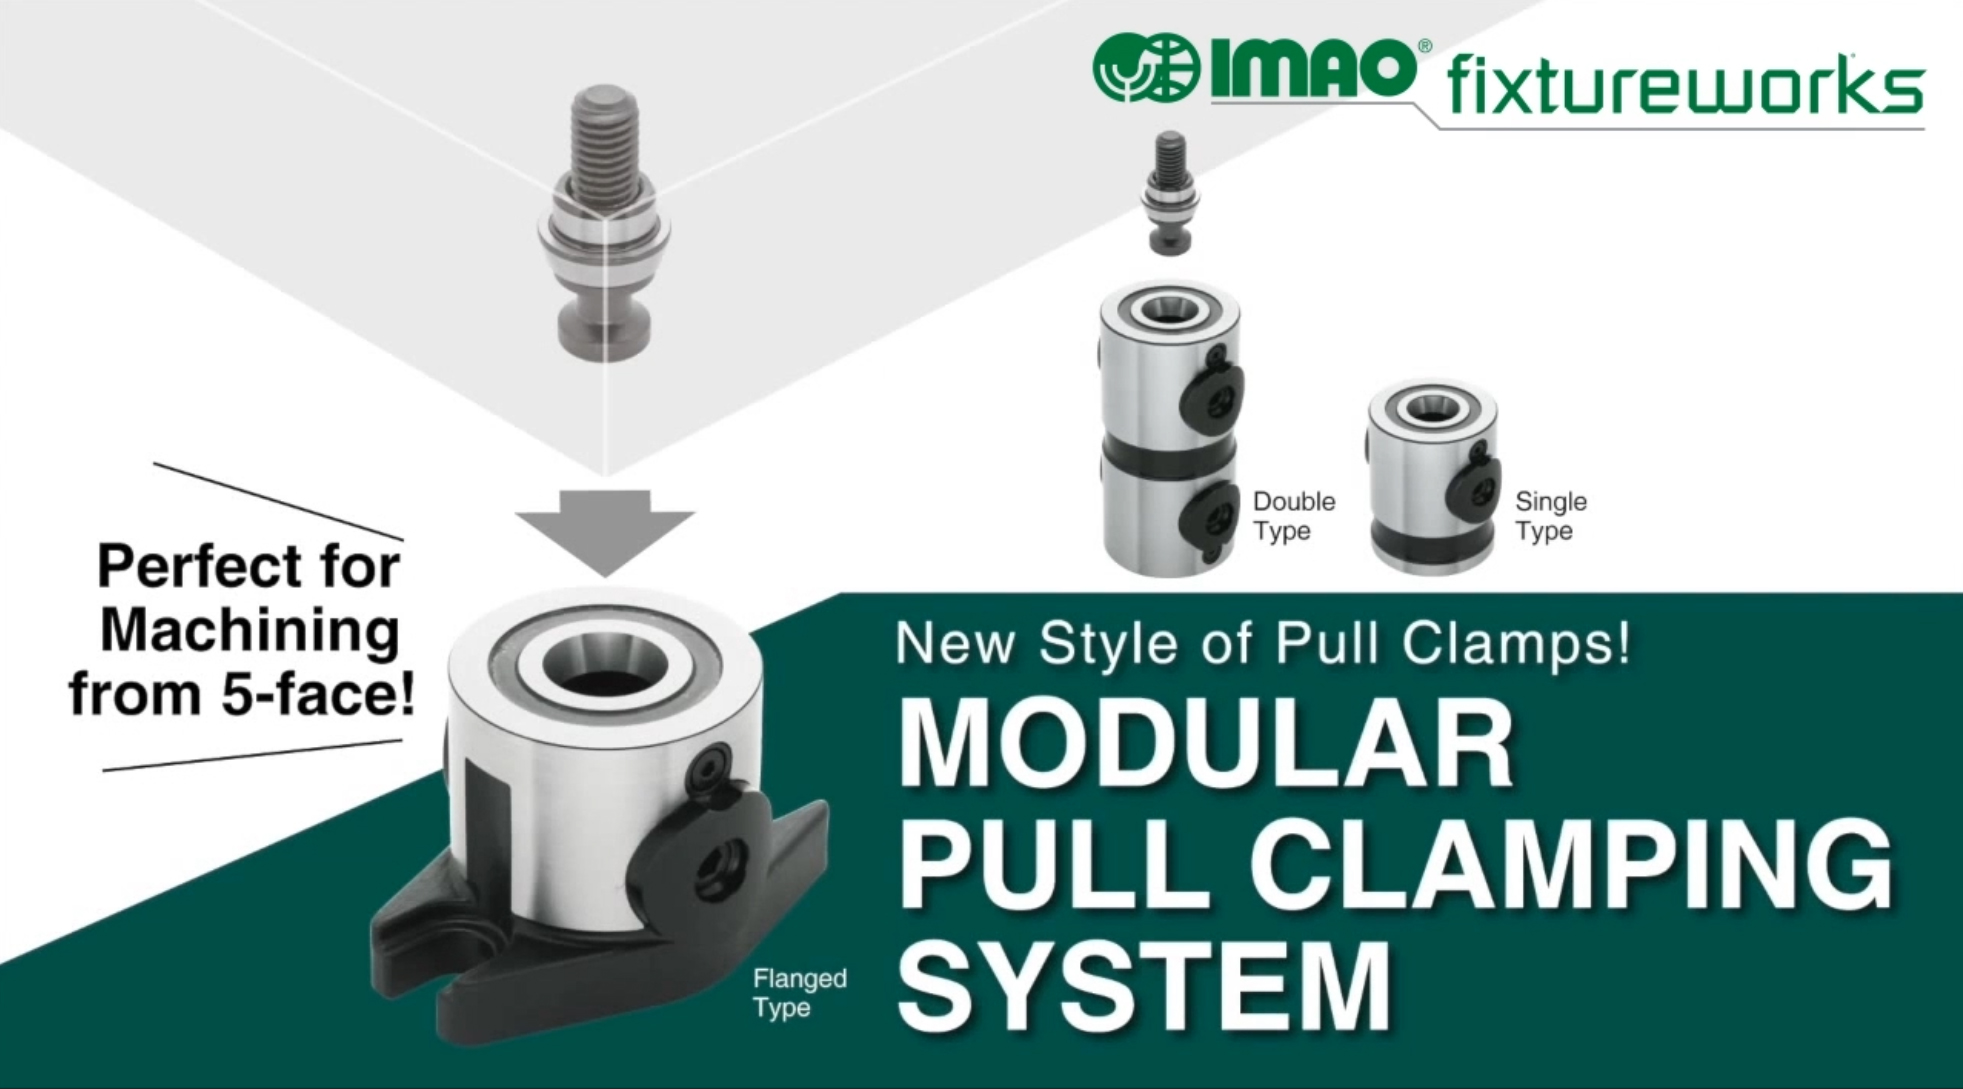 The Innovative 5-Axis Modular Pull Clamping System